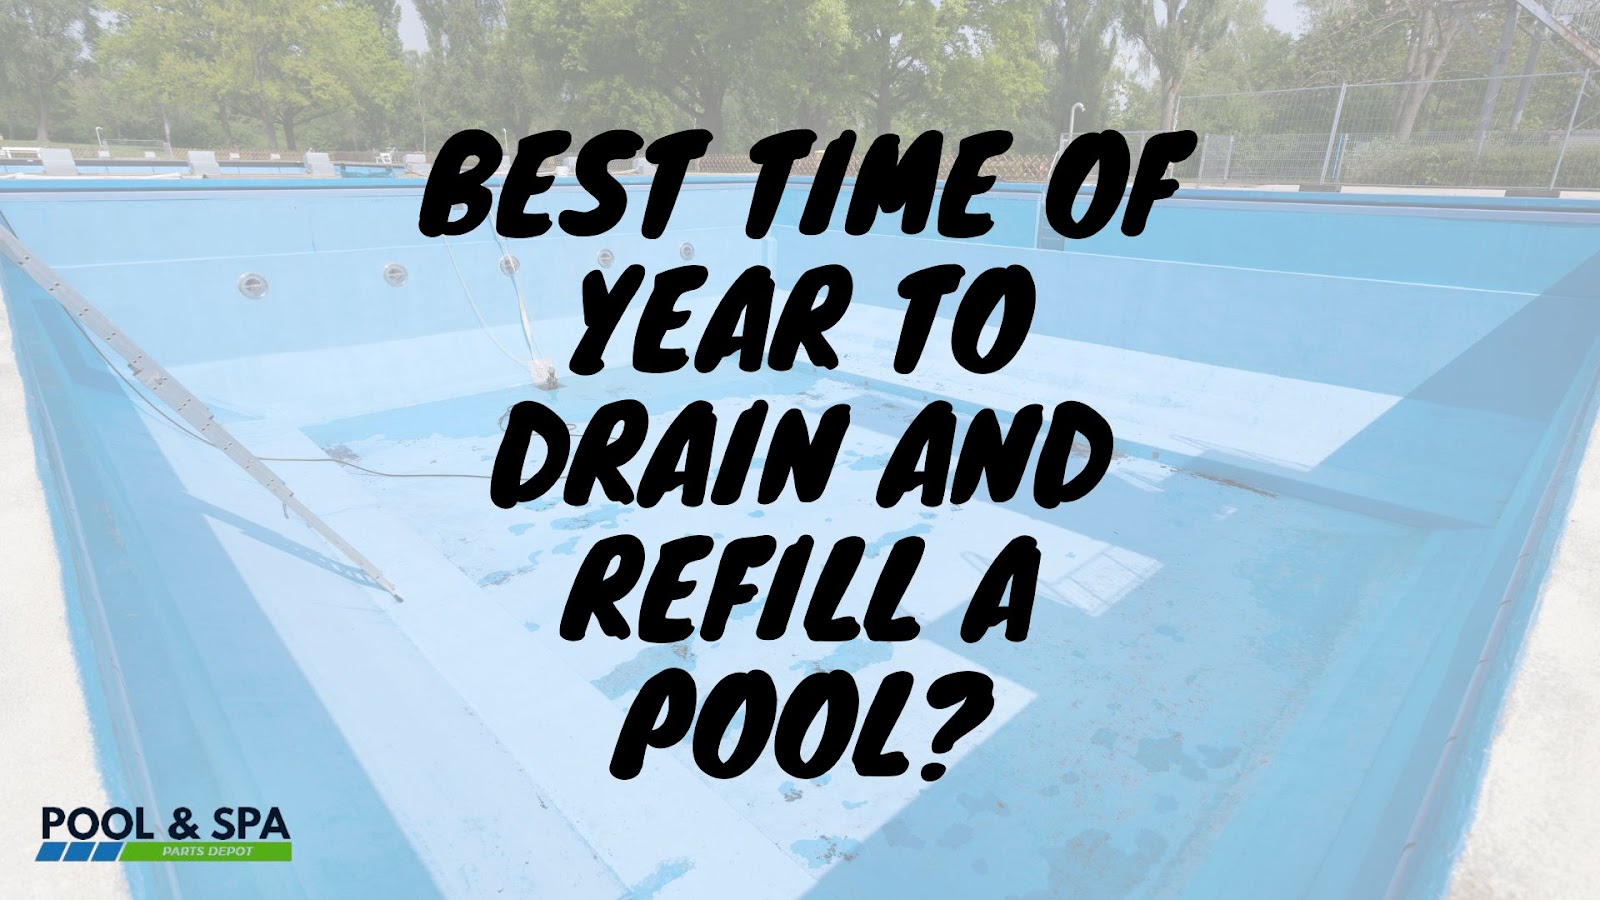 Best Time of Year to Drain and Refill a Pool?